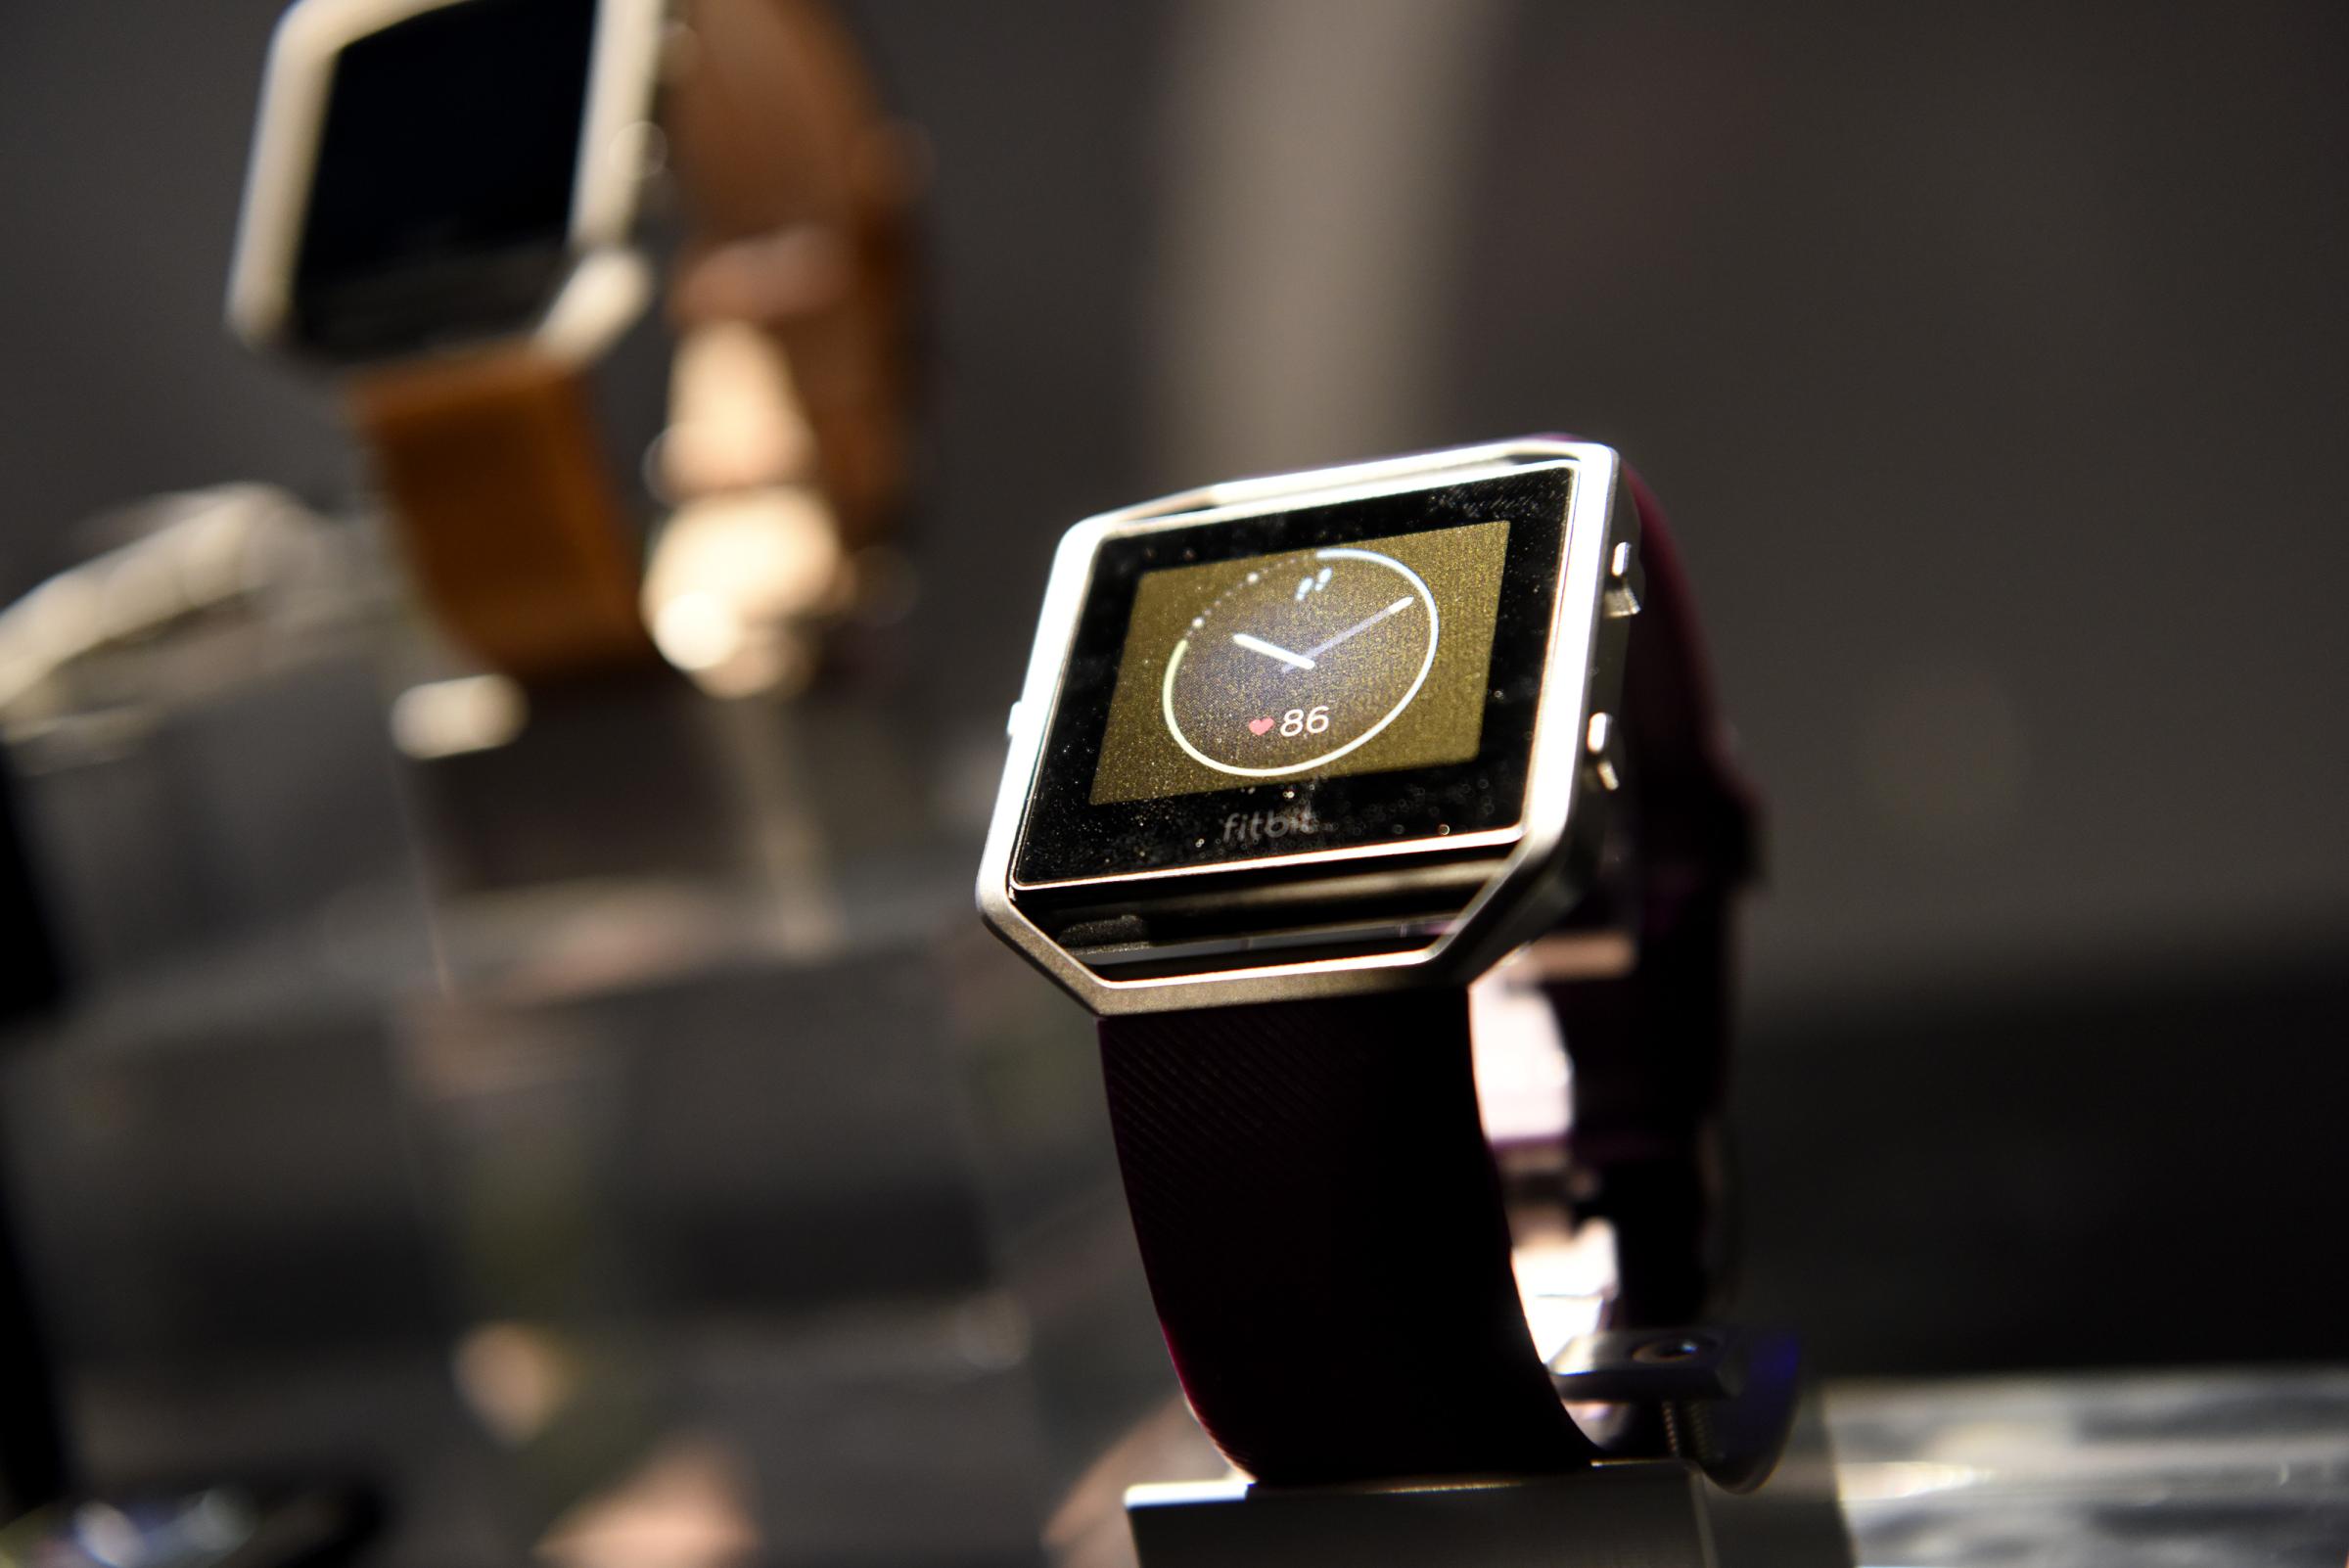 The Fitbit Inc. Blaze fitness tracker is displayed during an event at the 2016 Consumer Electronics Show (CES) in Las Vegas on Jan. 5, 2016.